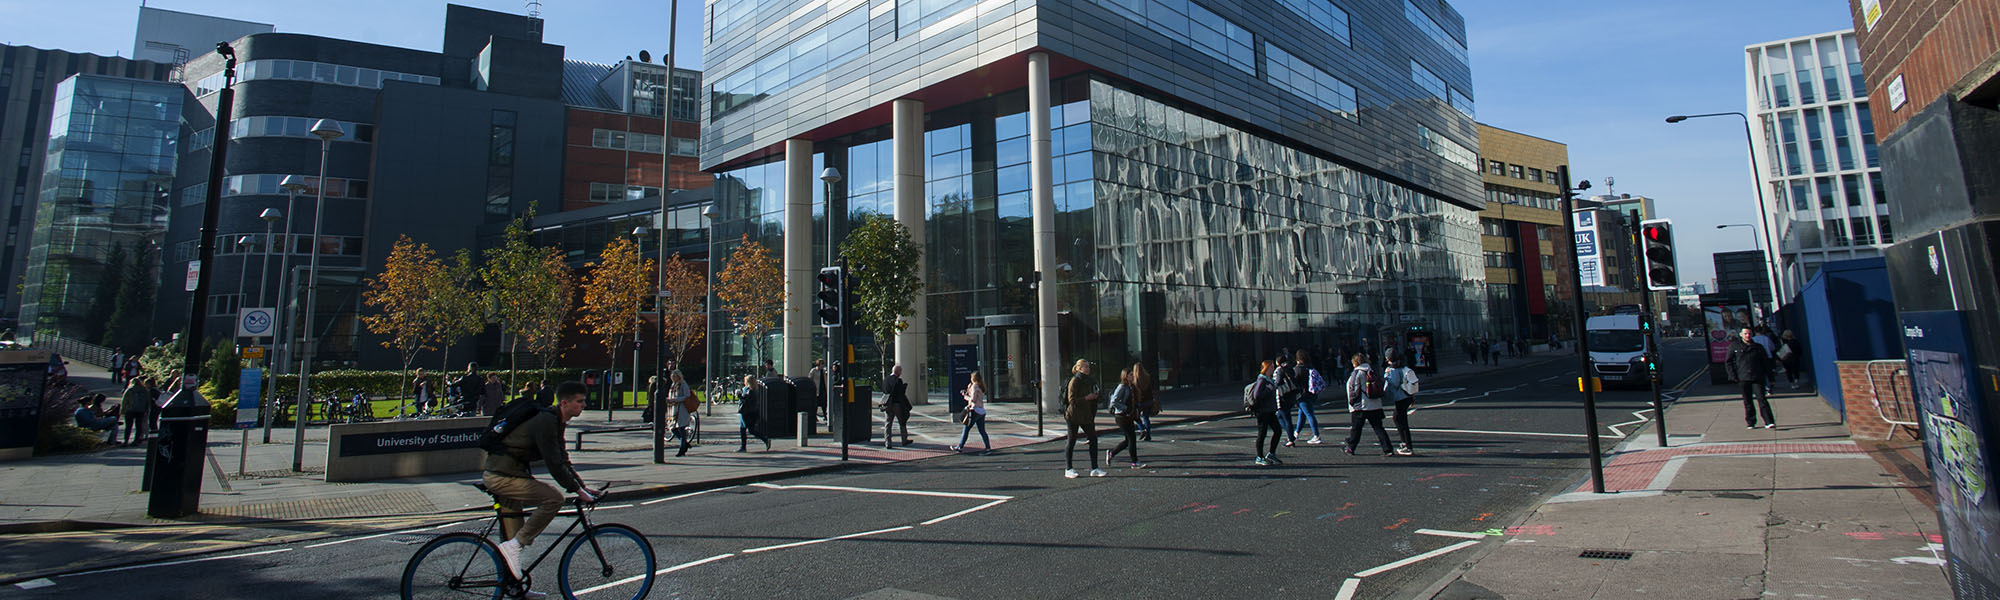 Strathclyde campus, Cathedral Street, Glasgow